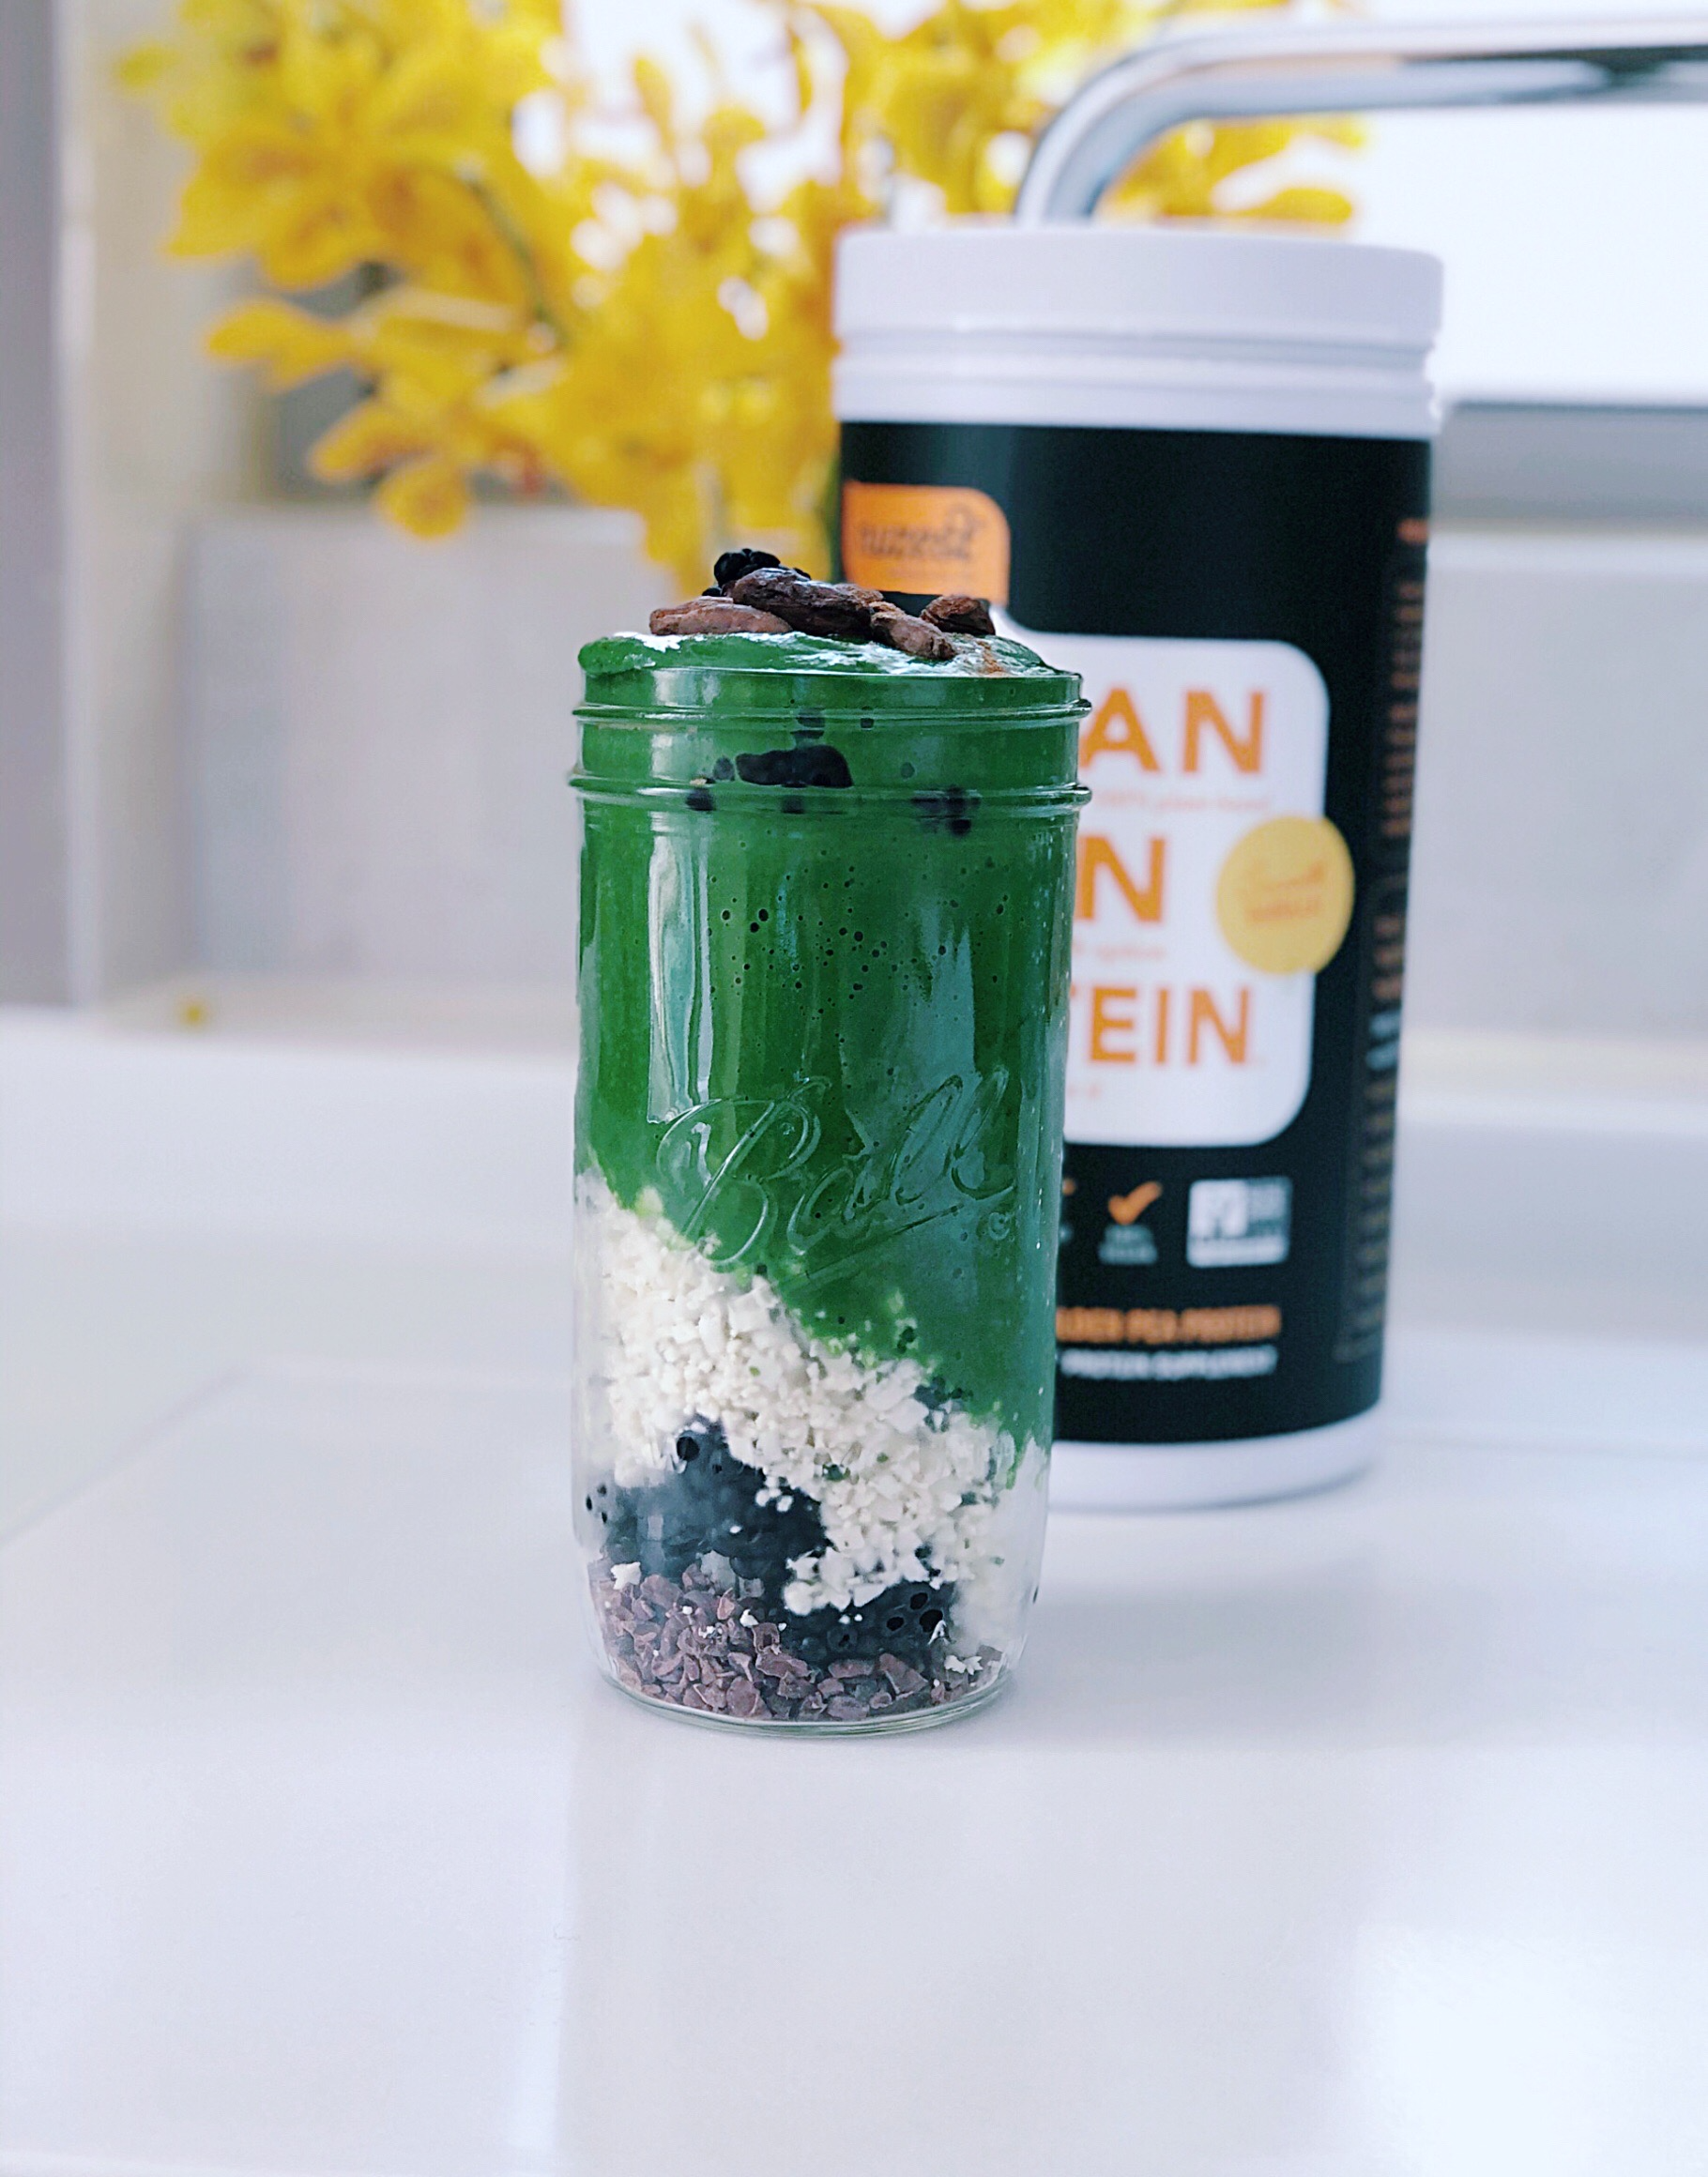 SEE THE GOOD IN THIS GREENS SMOOTHIE